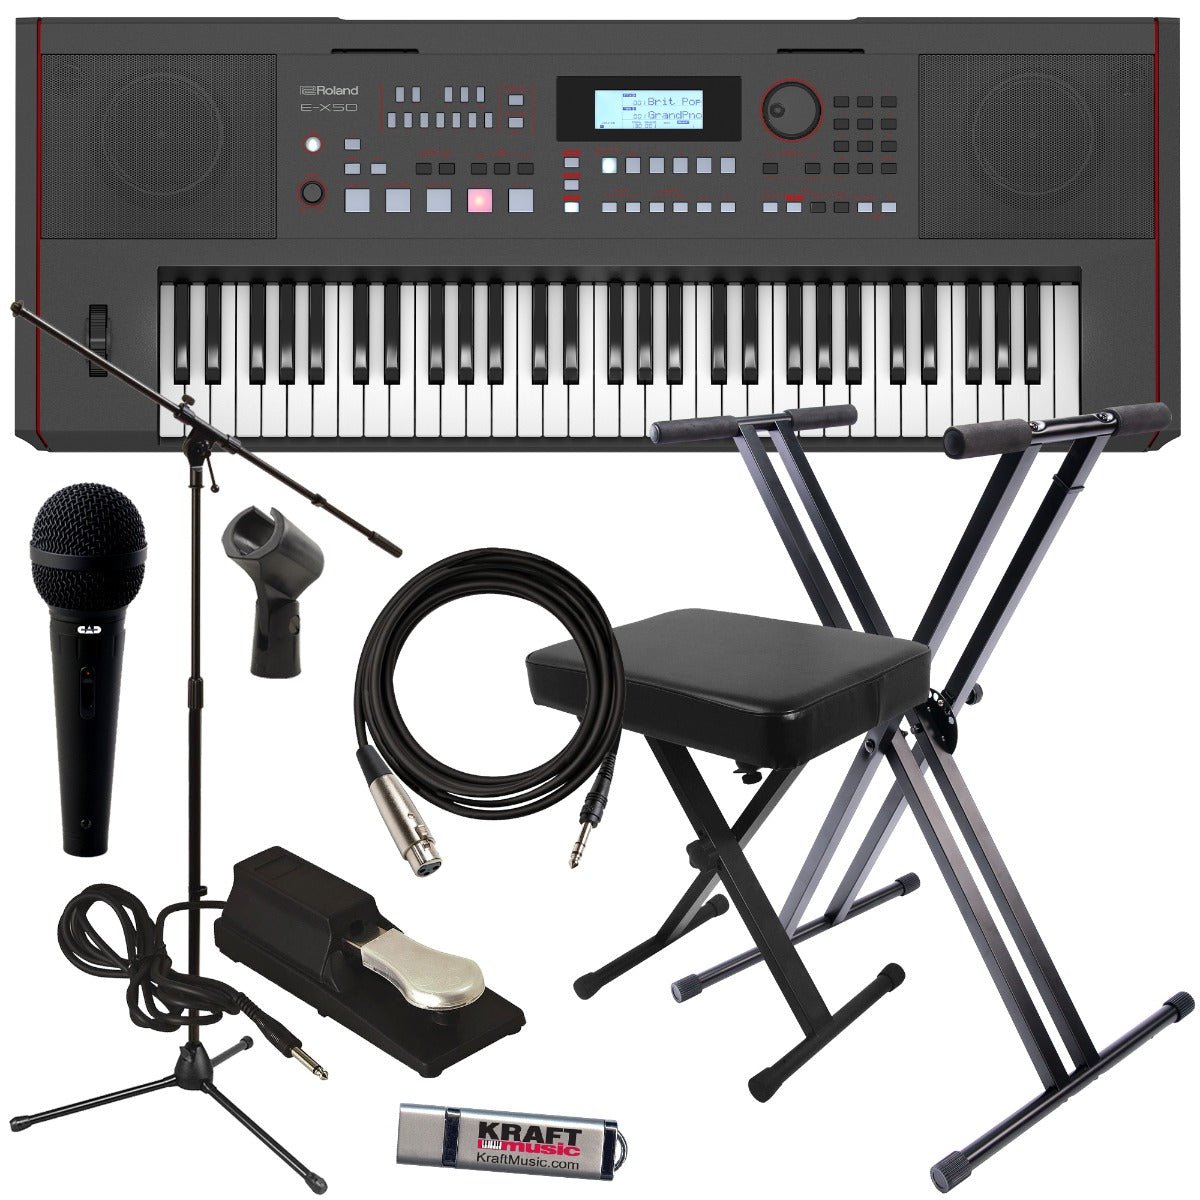 Collage of the Roland E-X50 Arranger Keyboard STUDIO RIG showing included components